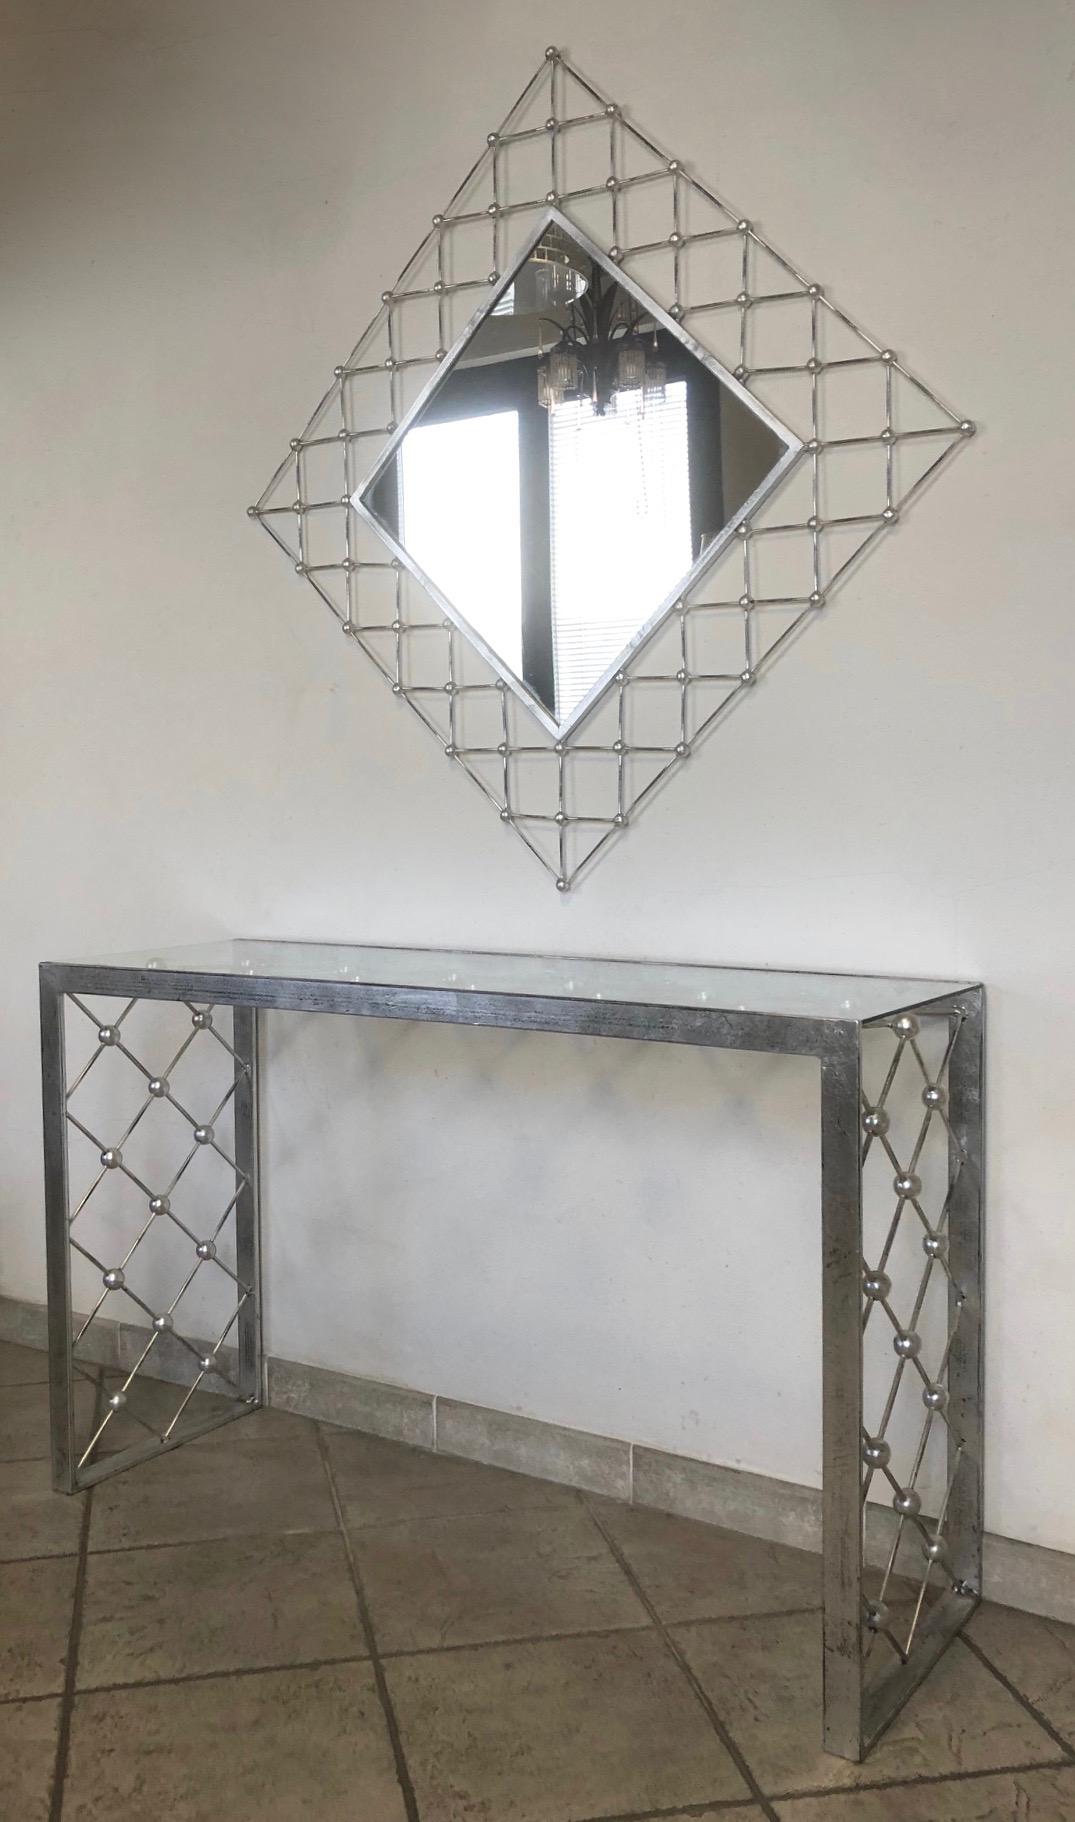 Italian Modern Industrial Design Criss Cross Fretwork Iron Console / Entry Table For Sale 5